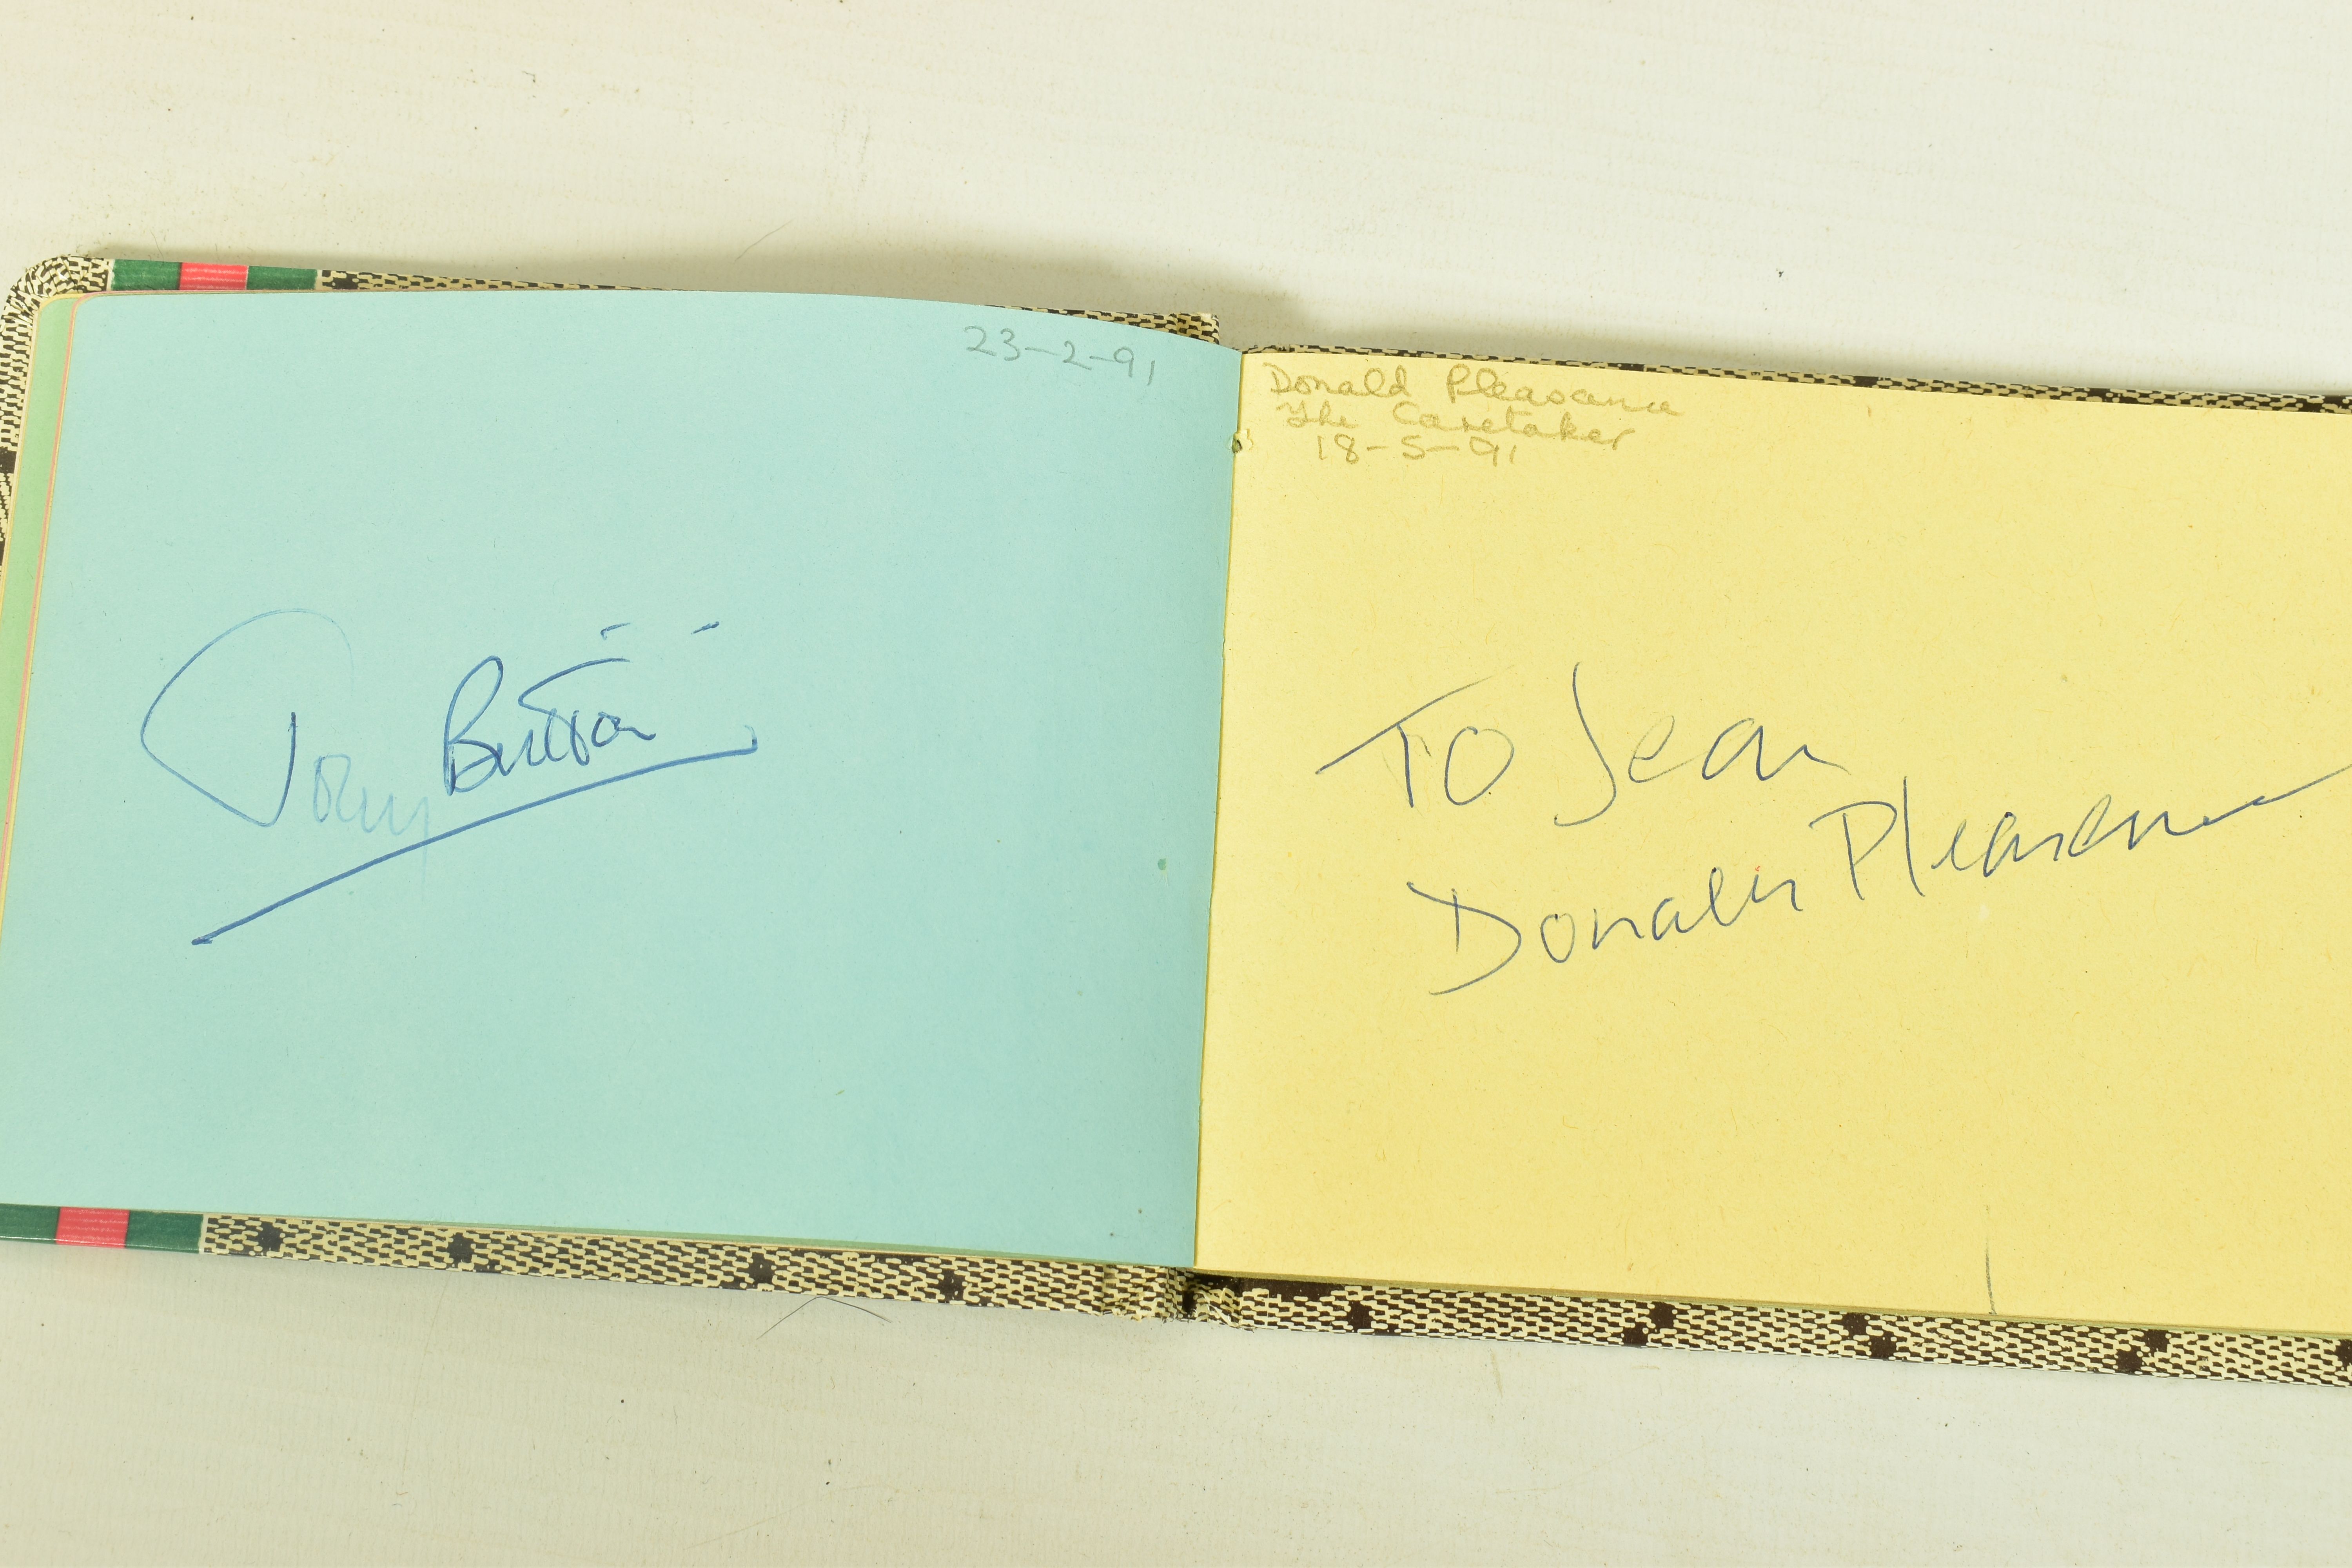 FILM & STAGE AUTOGRAPH ALBUM, a collection of signatures in two autograph albums featuring some of - Image 8 of 8